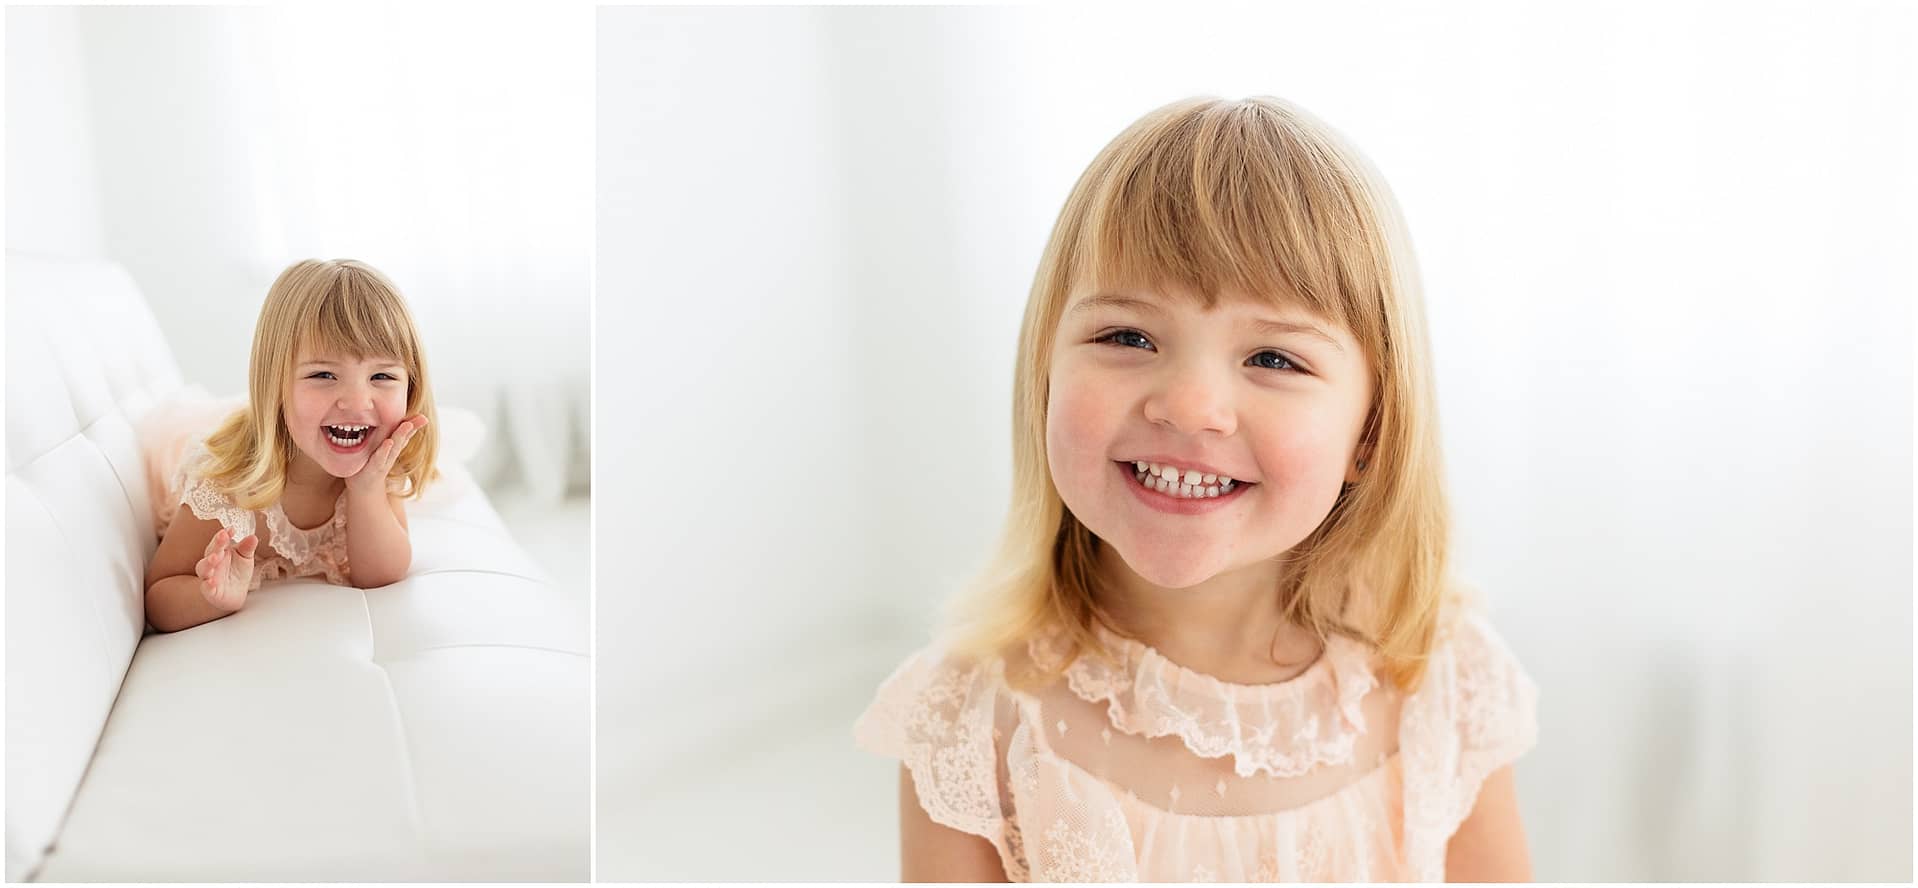 Little girl giggles during childhood portrait session. Photo by Tiffany Hix Photography.